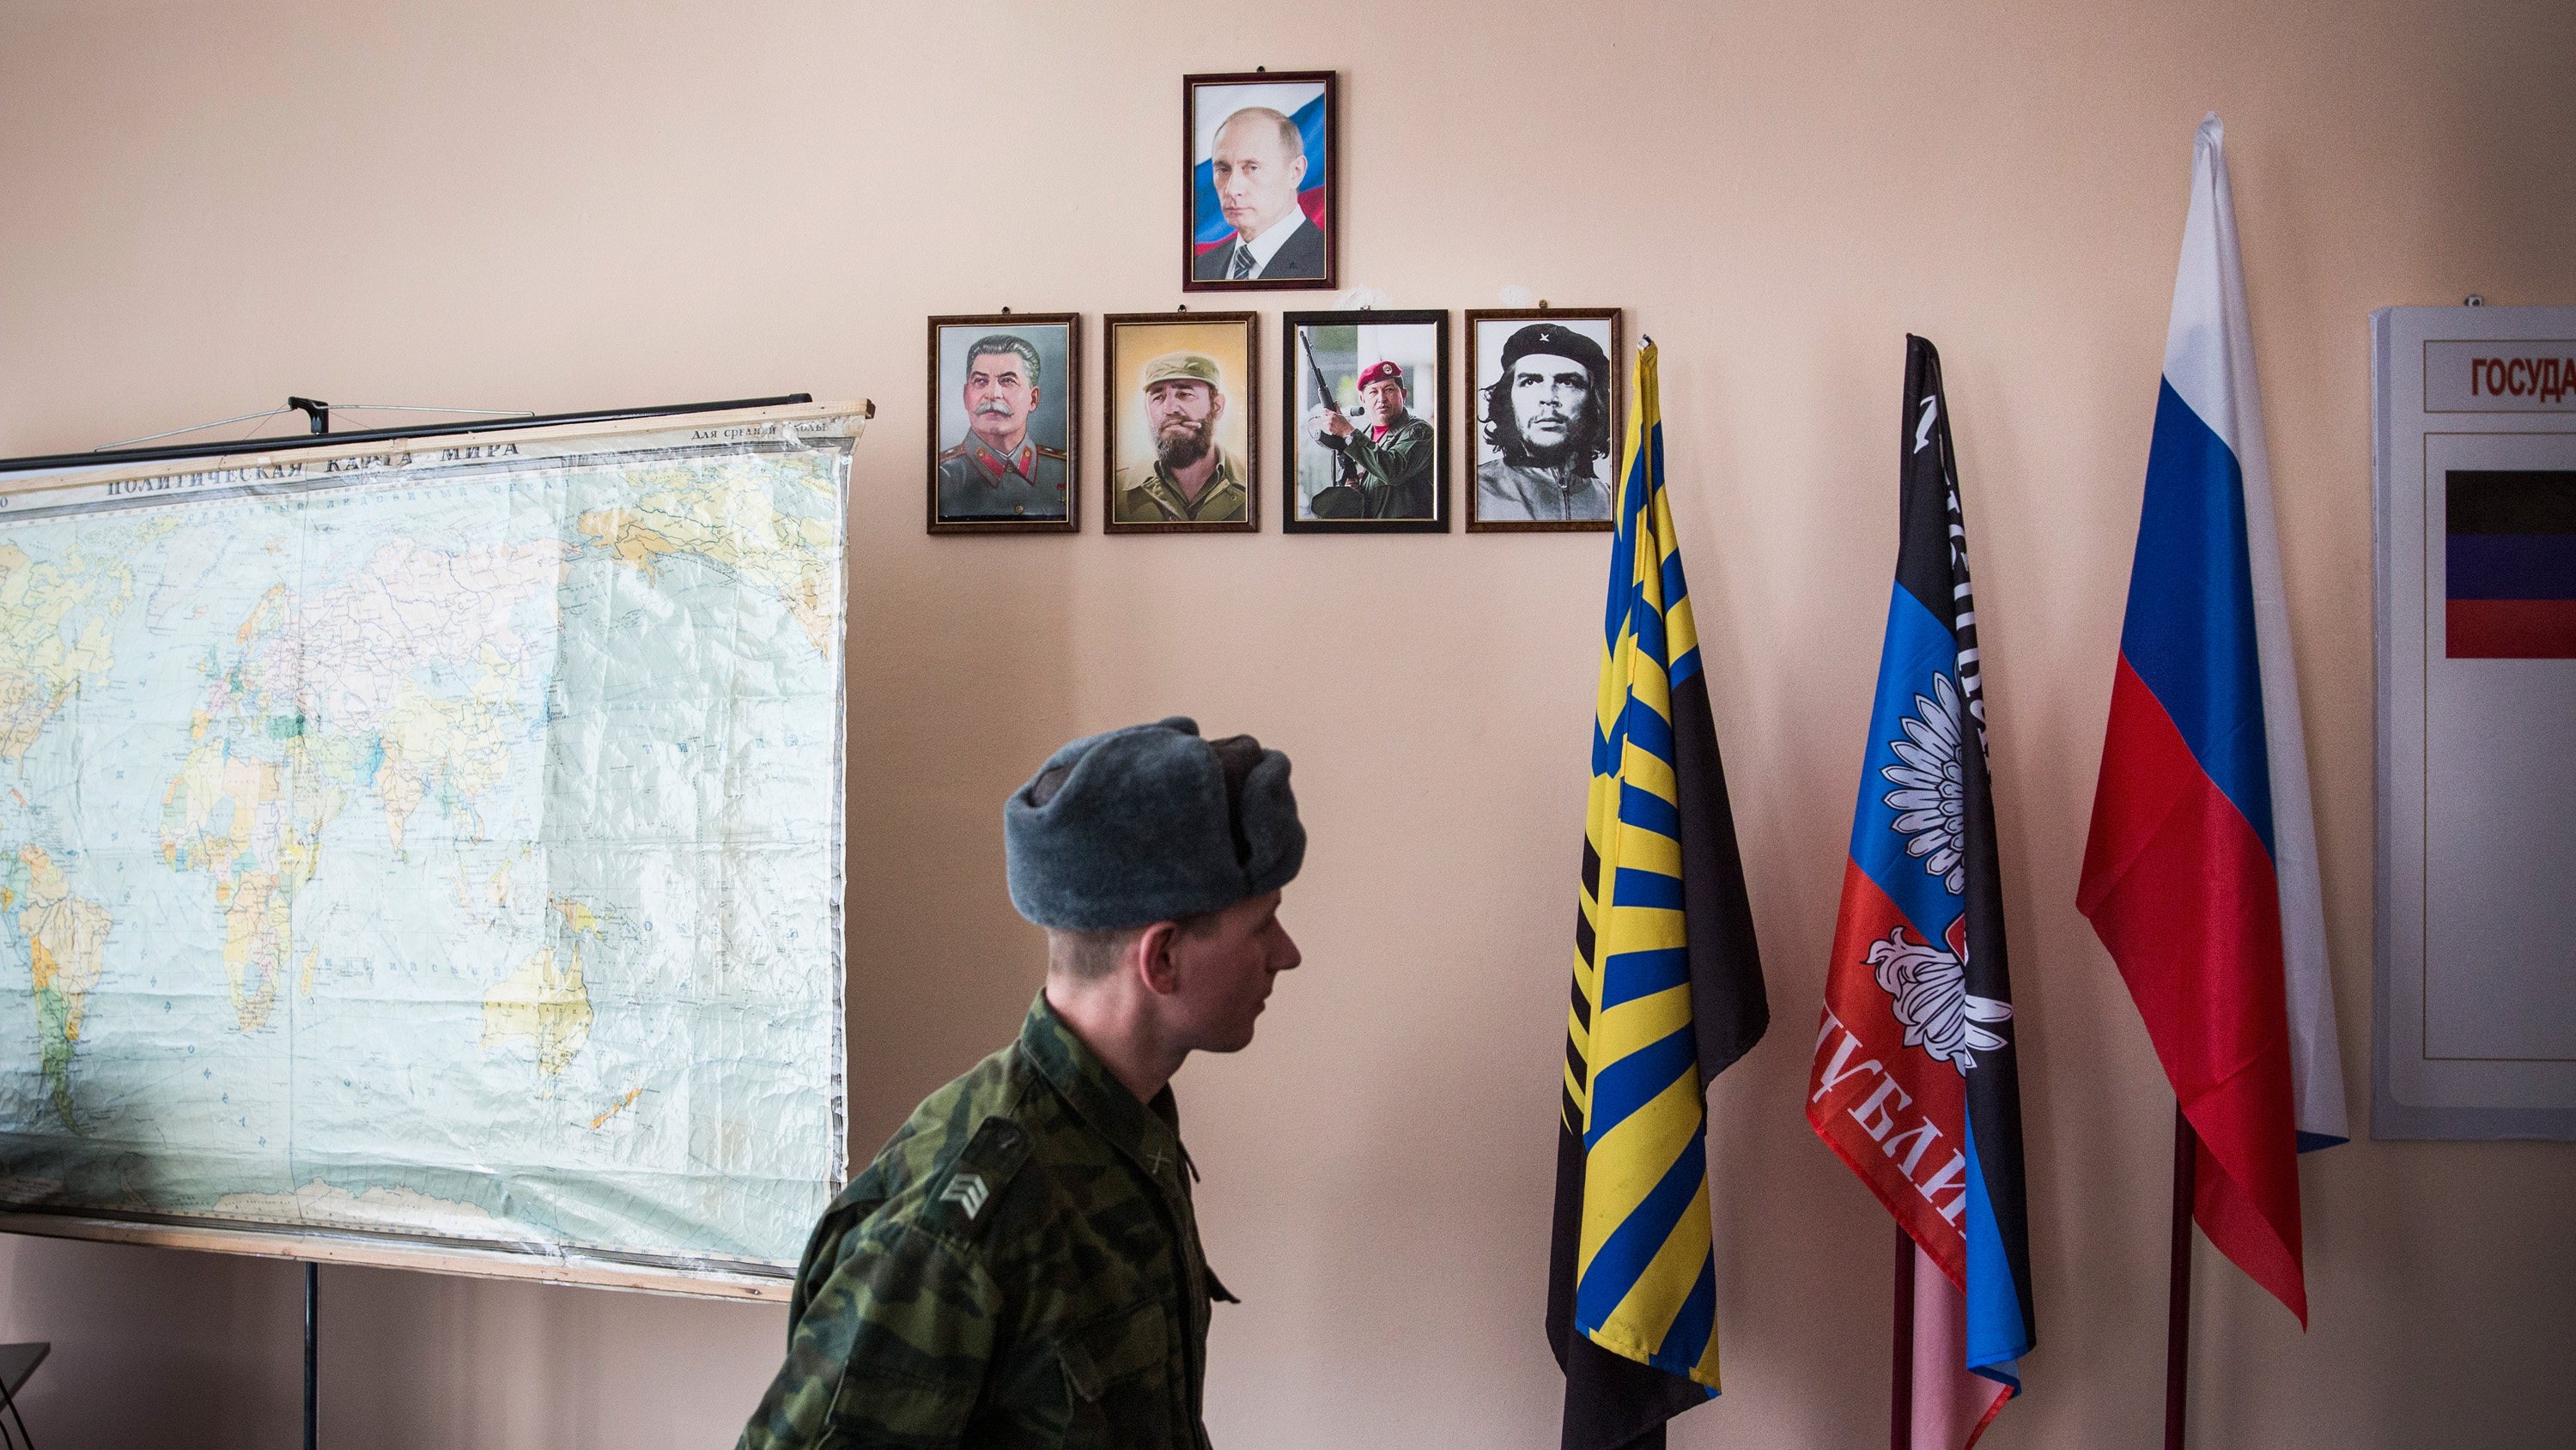 Conflict In Eastern Ukraine Takes Its Toll On Donetsk Region